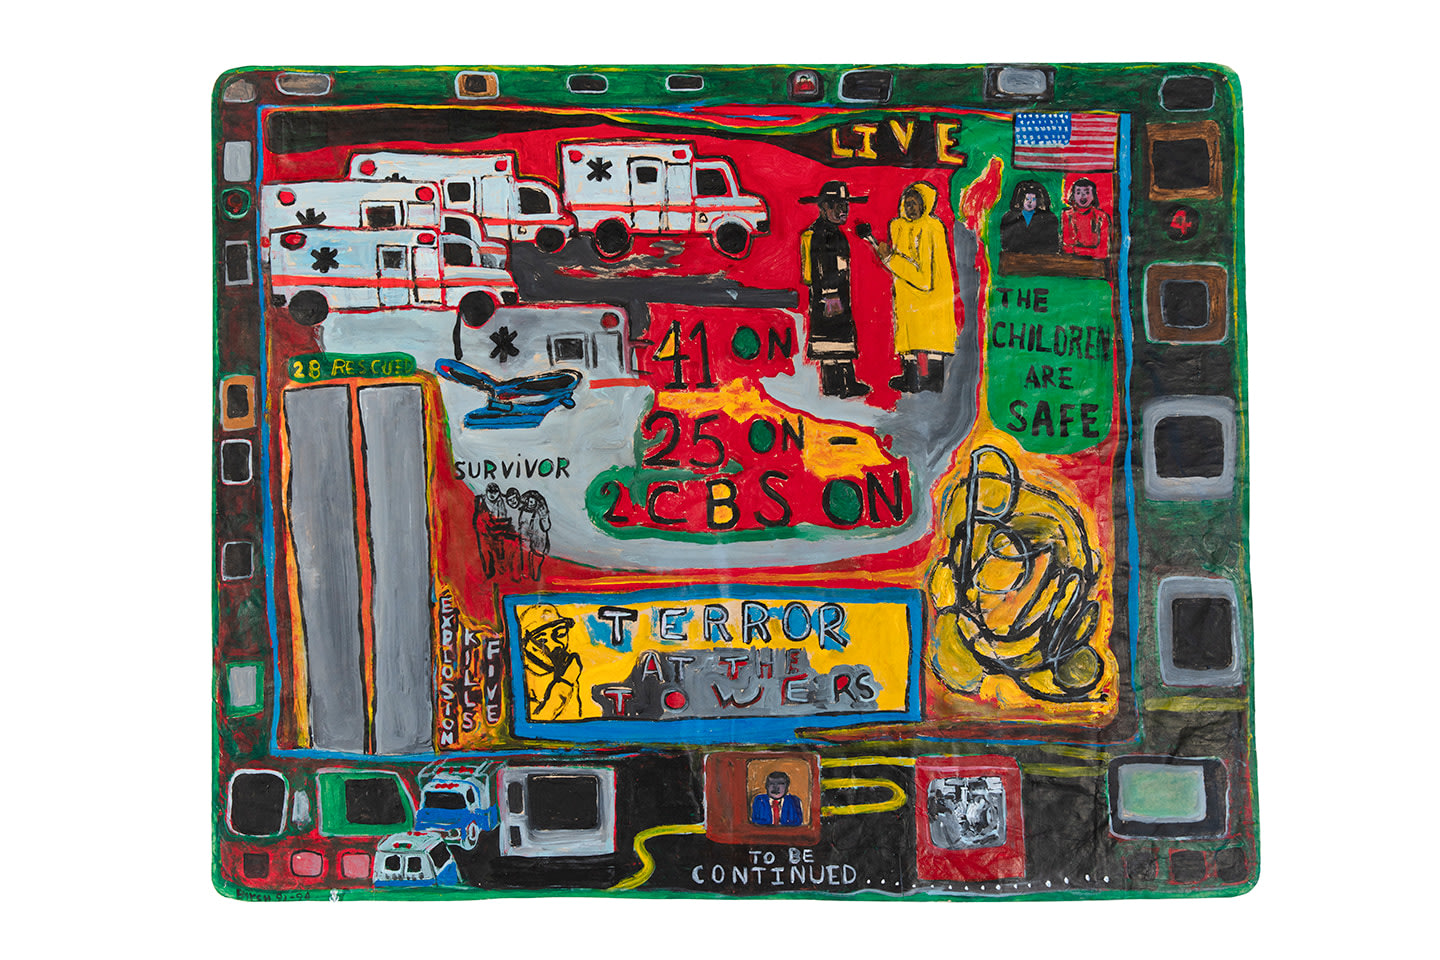 Terror at the Towers, 1993-94
Mixed media on paper
33.5 x 41.75 inches